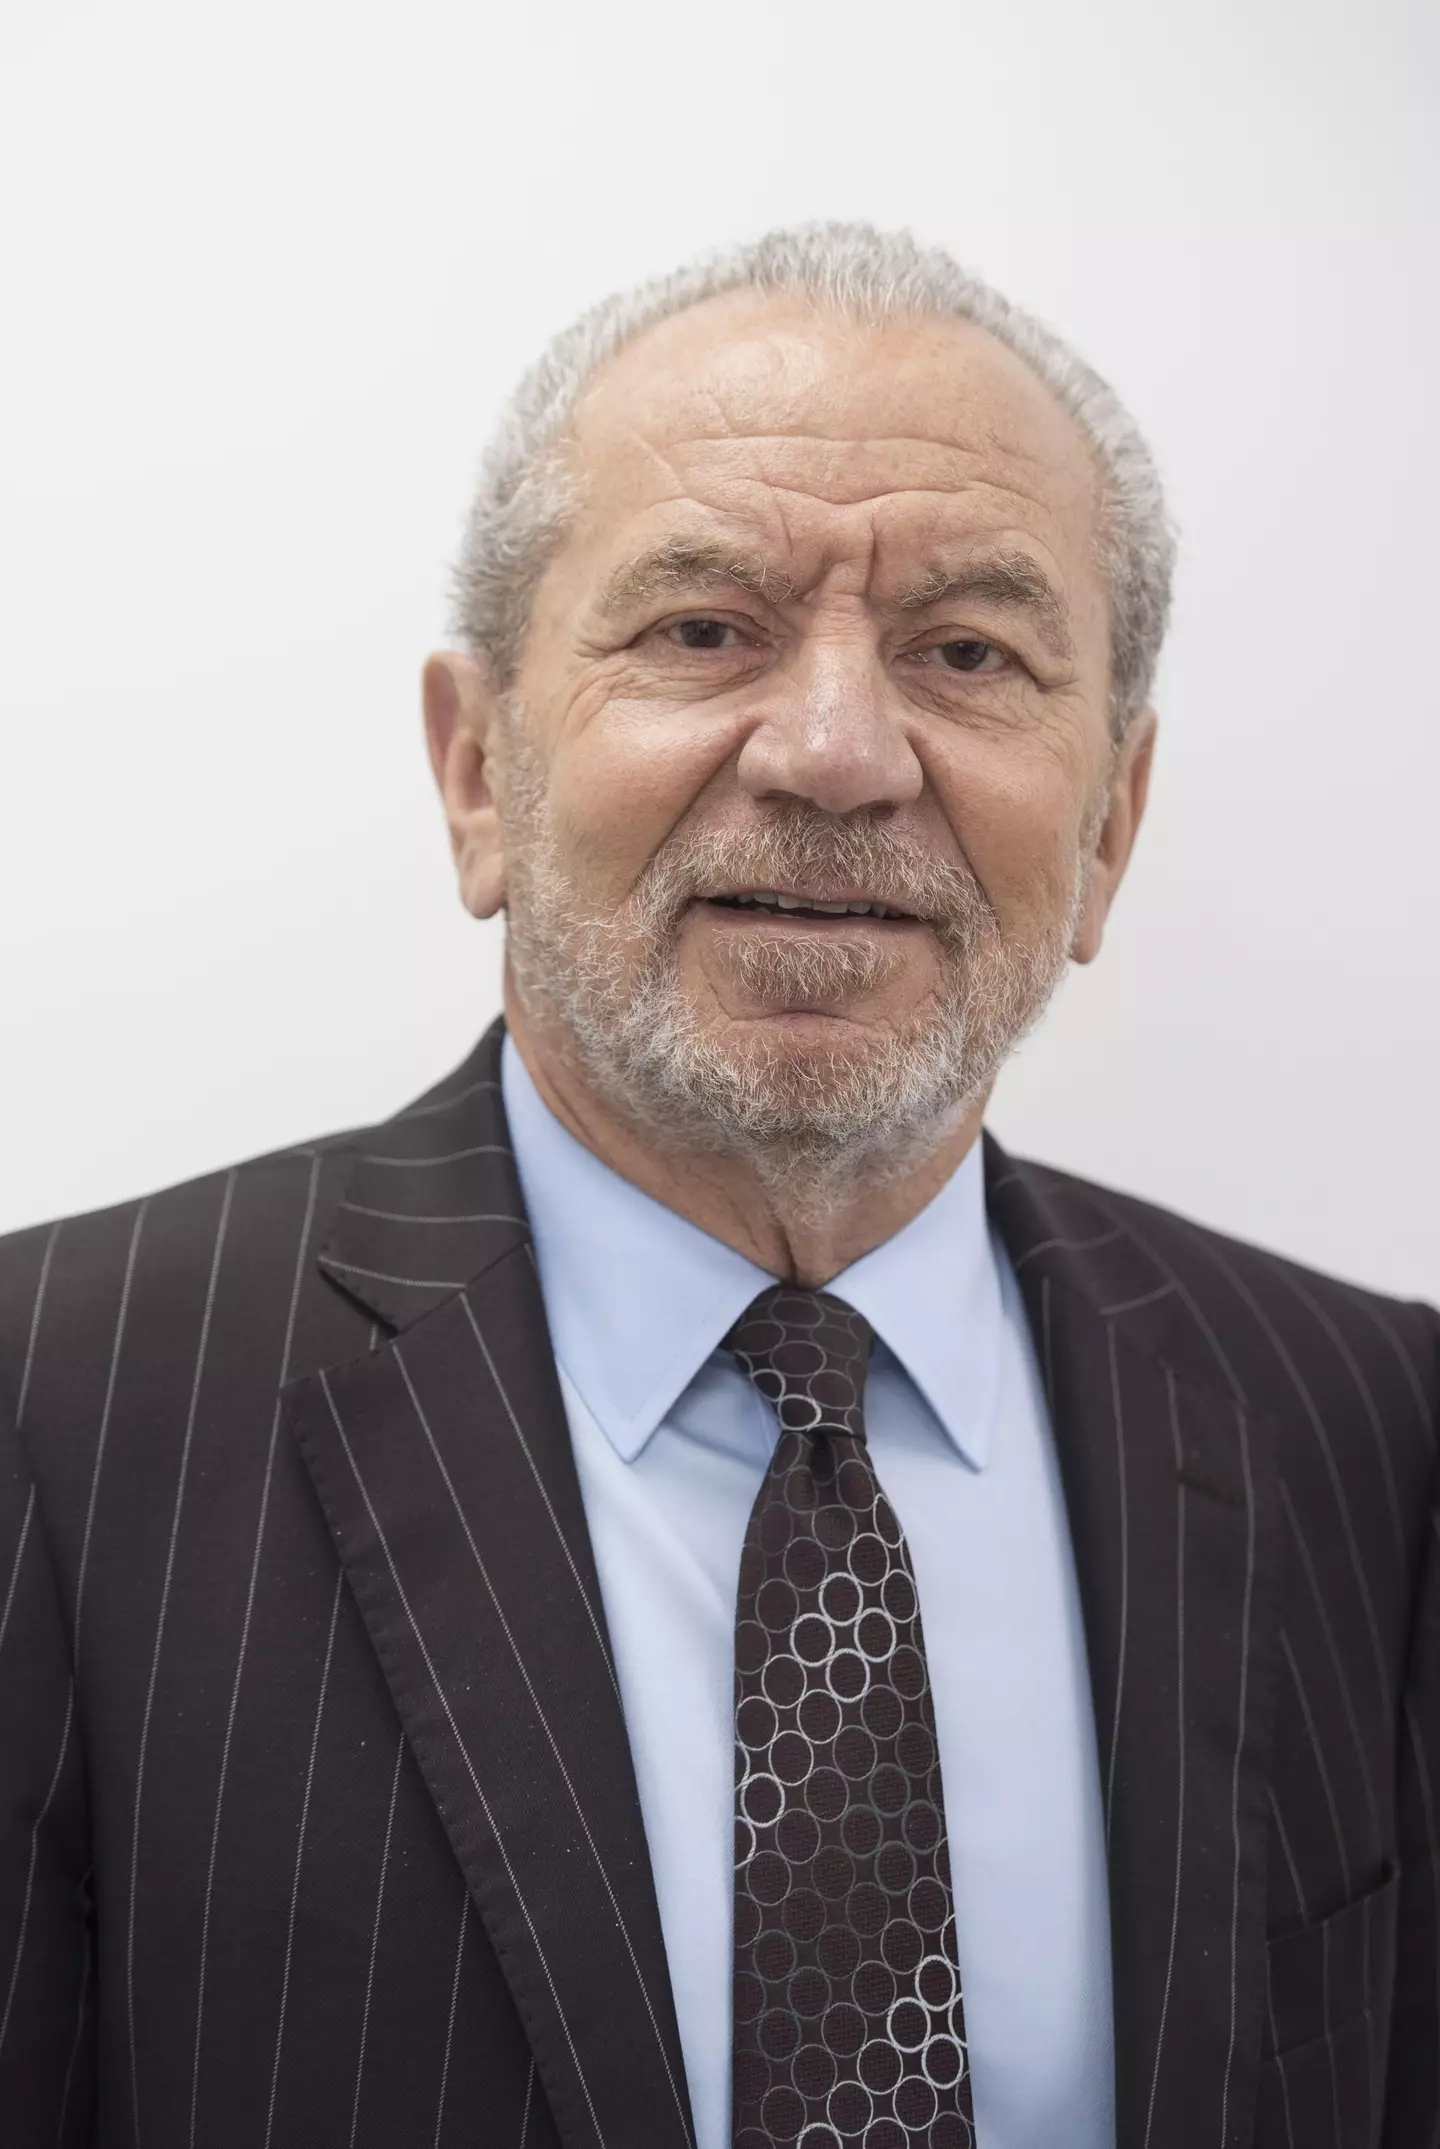 Alan Sugar shared his confusing thoughts on the Women's Euros.